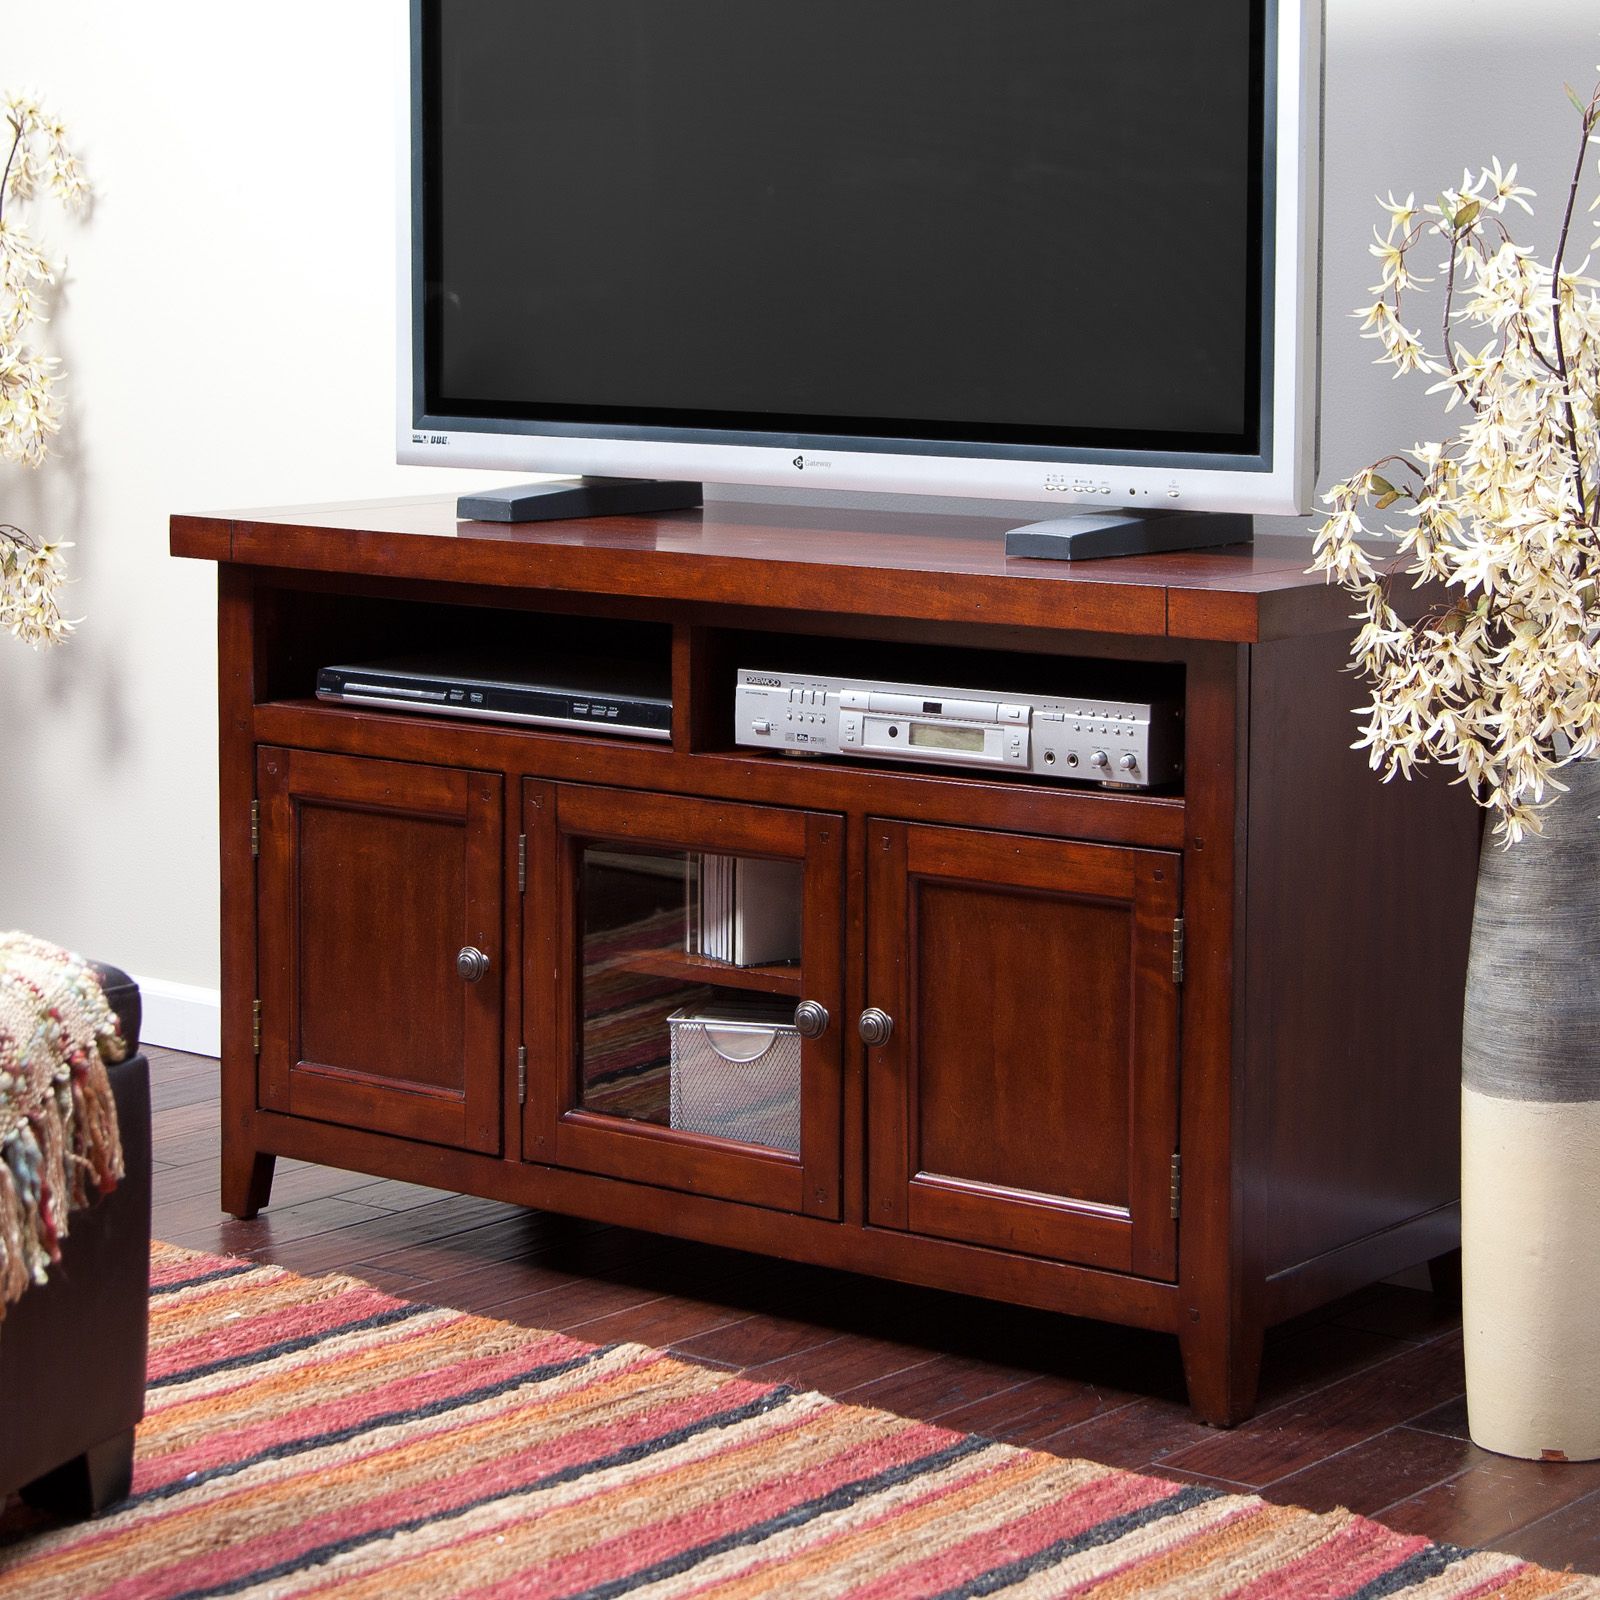 Carmina Traditional Tv Stand – Cherry At Hayneedle In Cherry Wood Tv Cabinets (View 4 of 15)